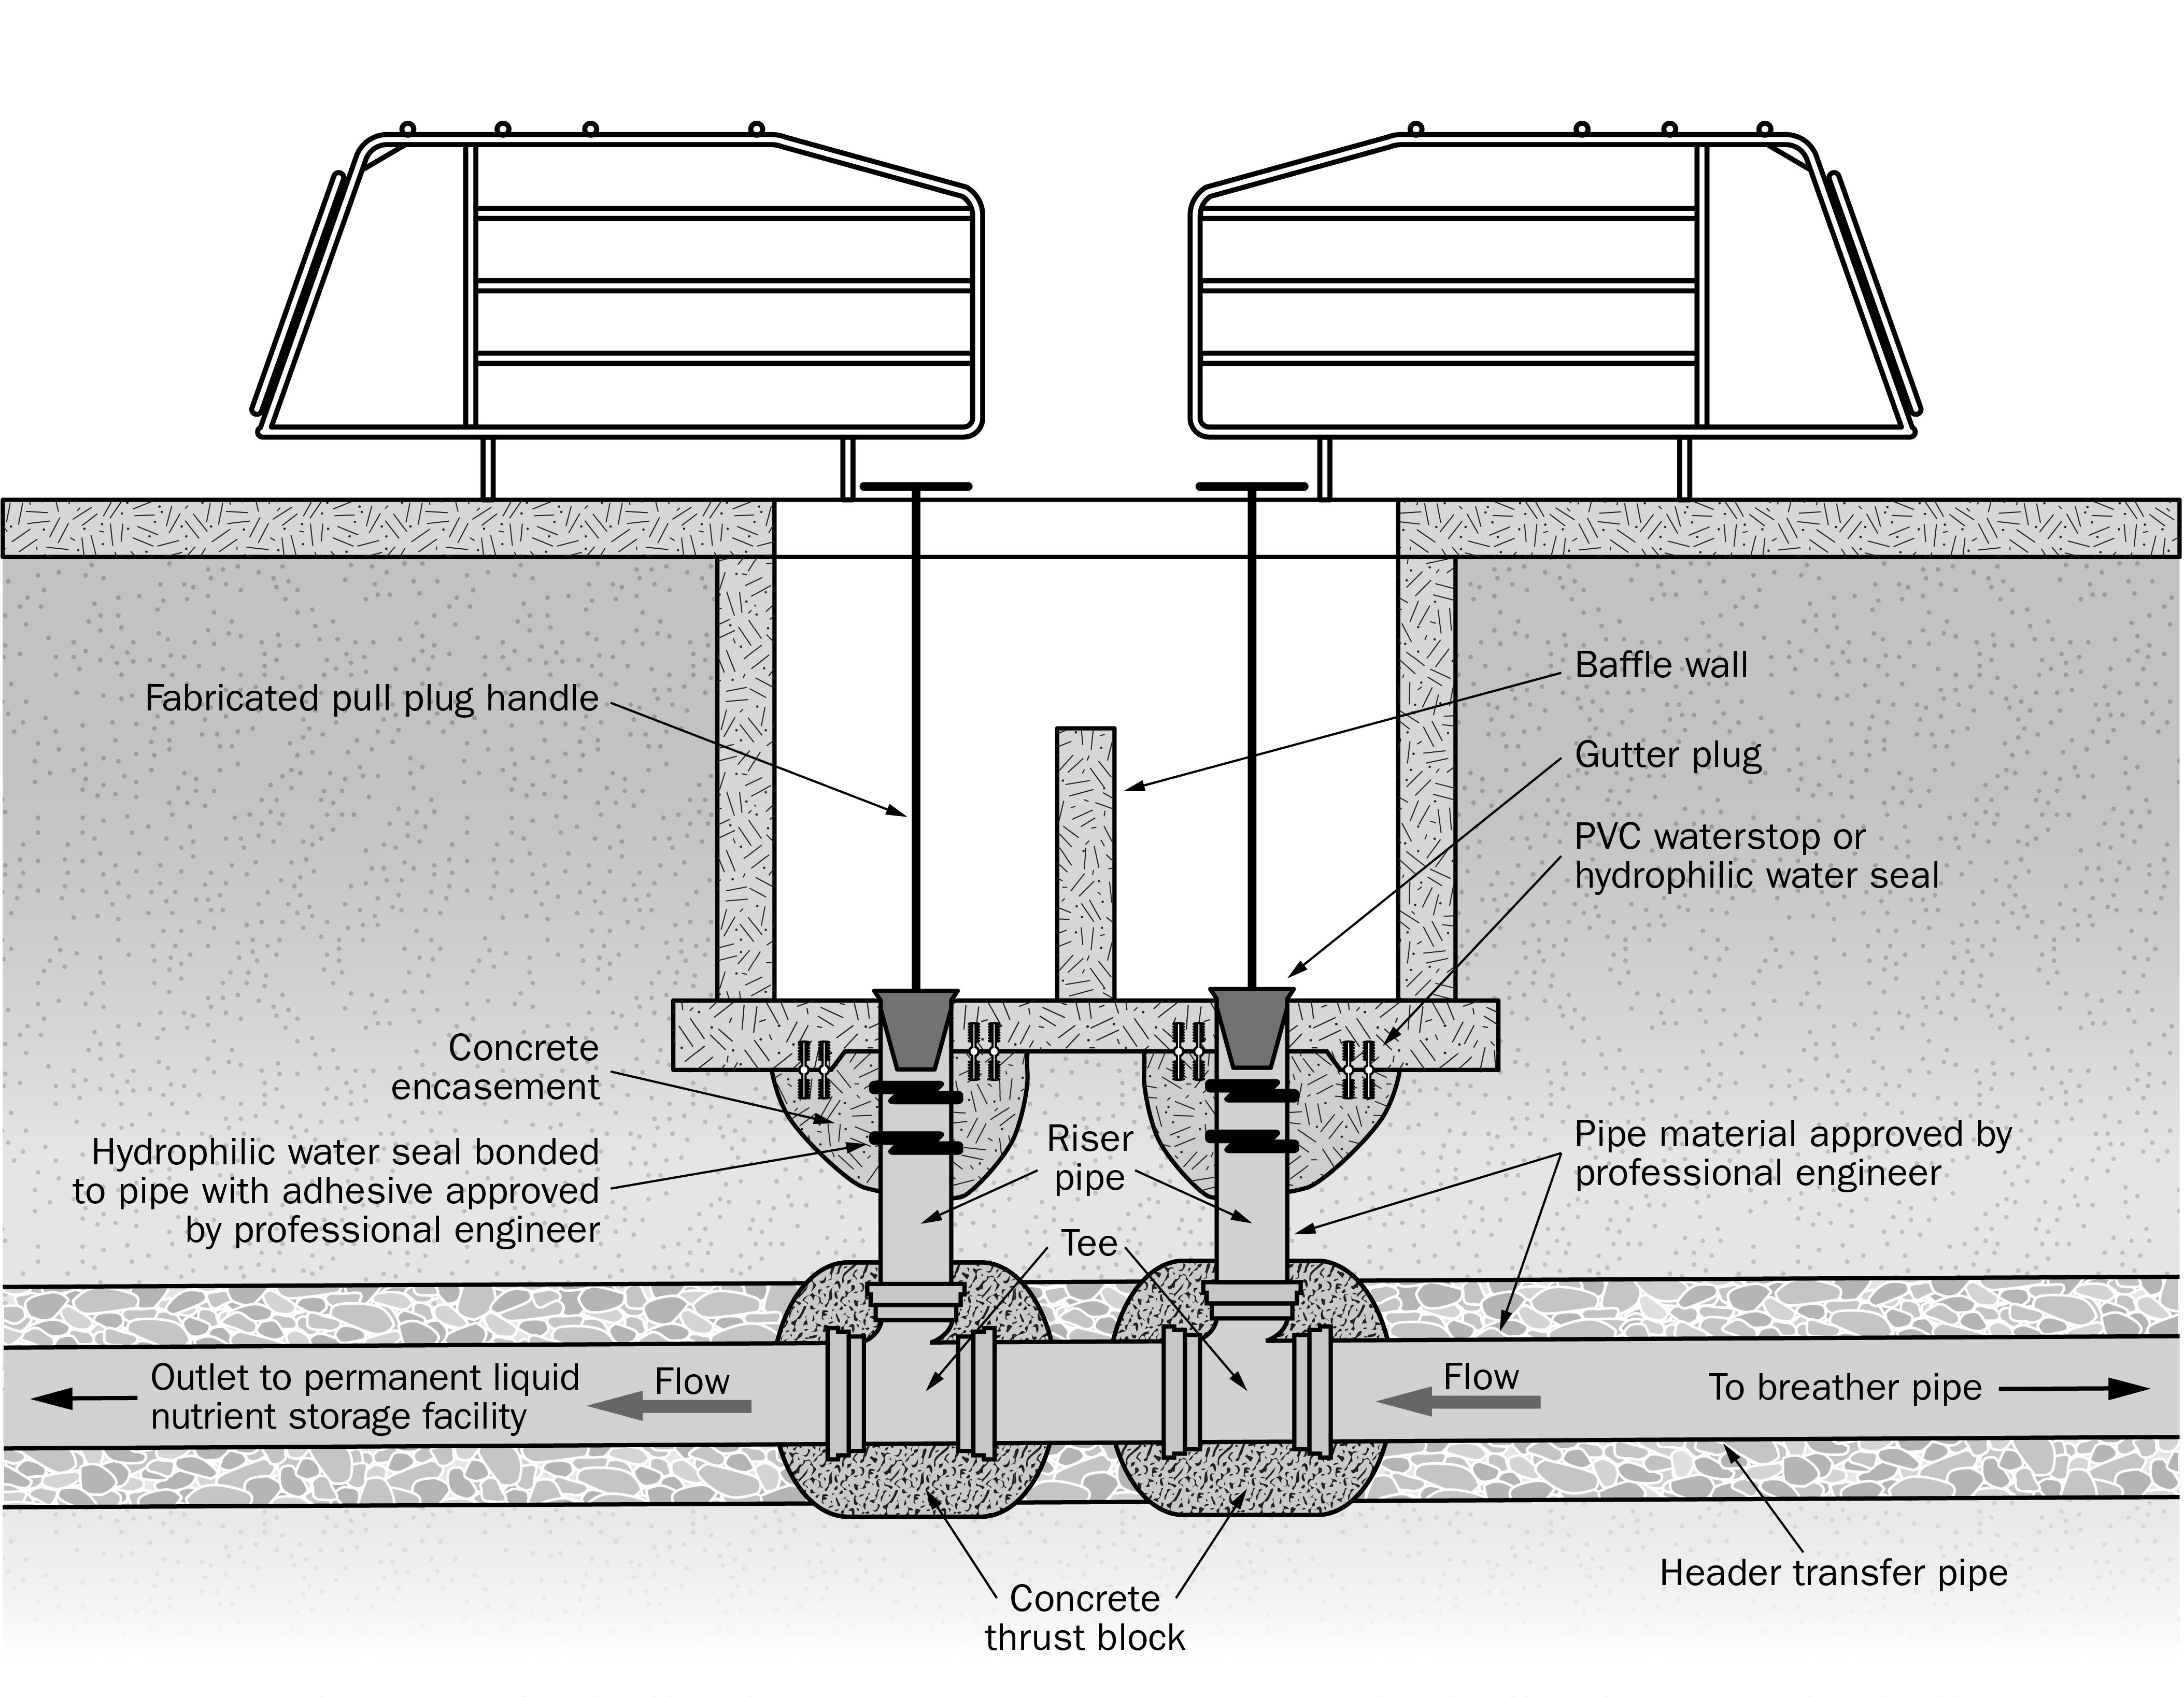 A drawing showing a concrete thrust block poured around a compound elbow pipe joint in transfer system piping. The thrust block is effective in preventing movement due to hydraulic forces in the pipe as pipe flow changes direction.